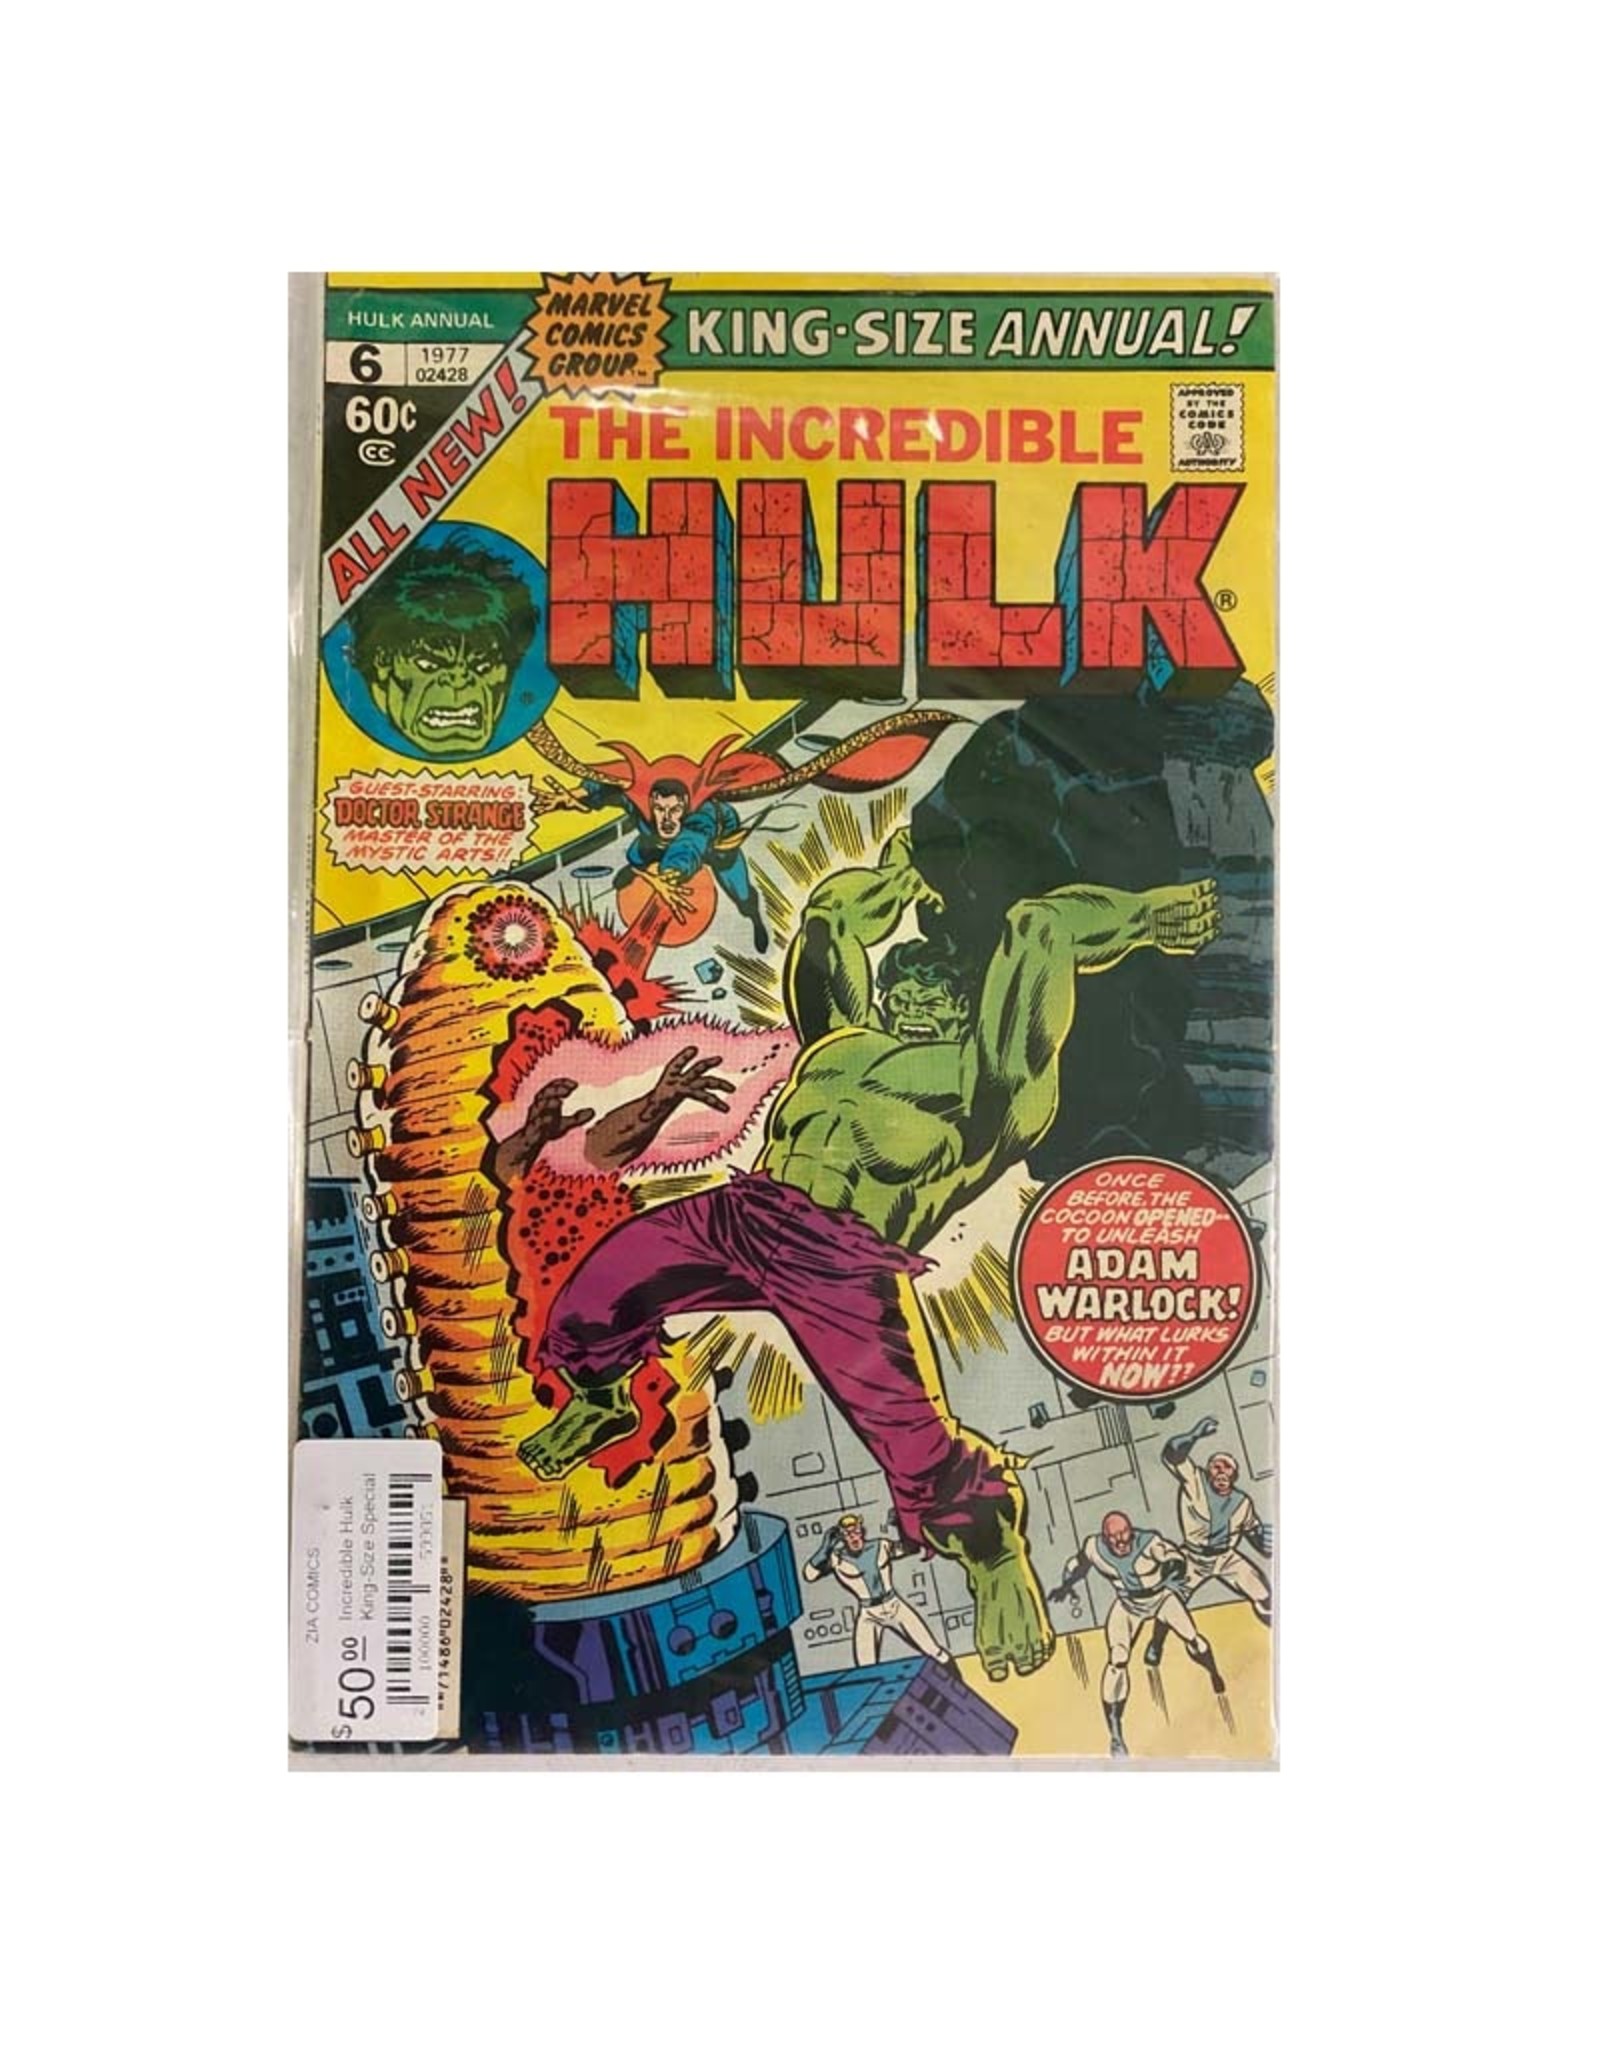 Marvel Comics Incredible Hulk King-Size Special #6 (.60 cover)